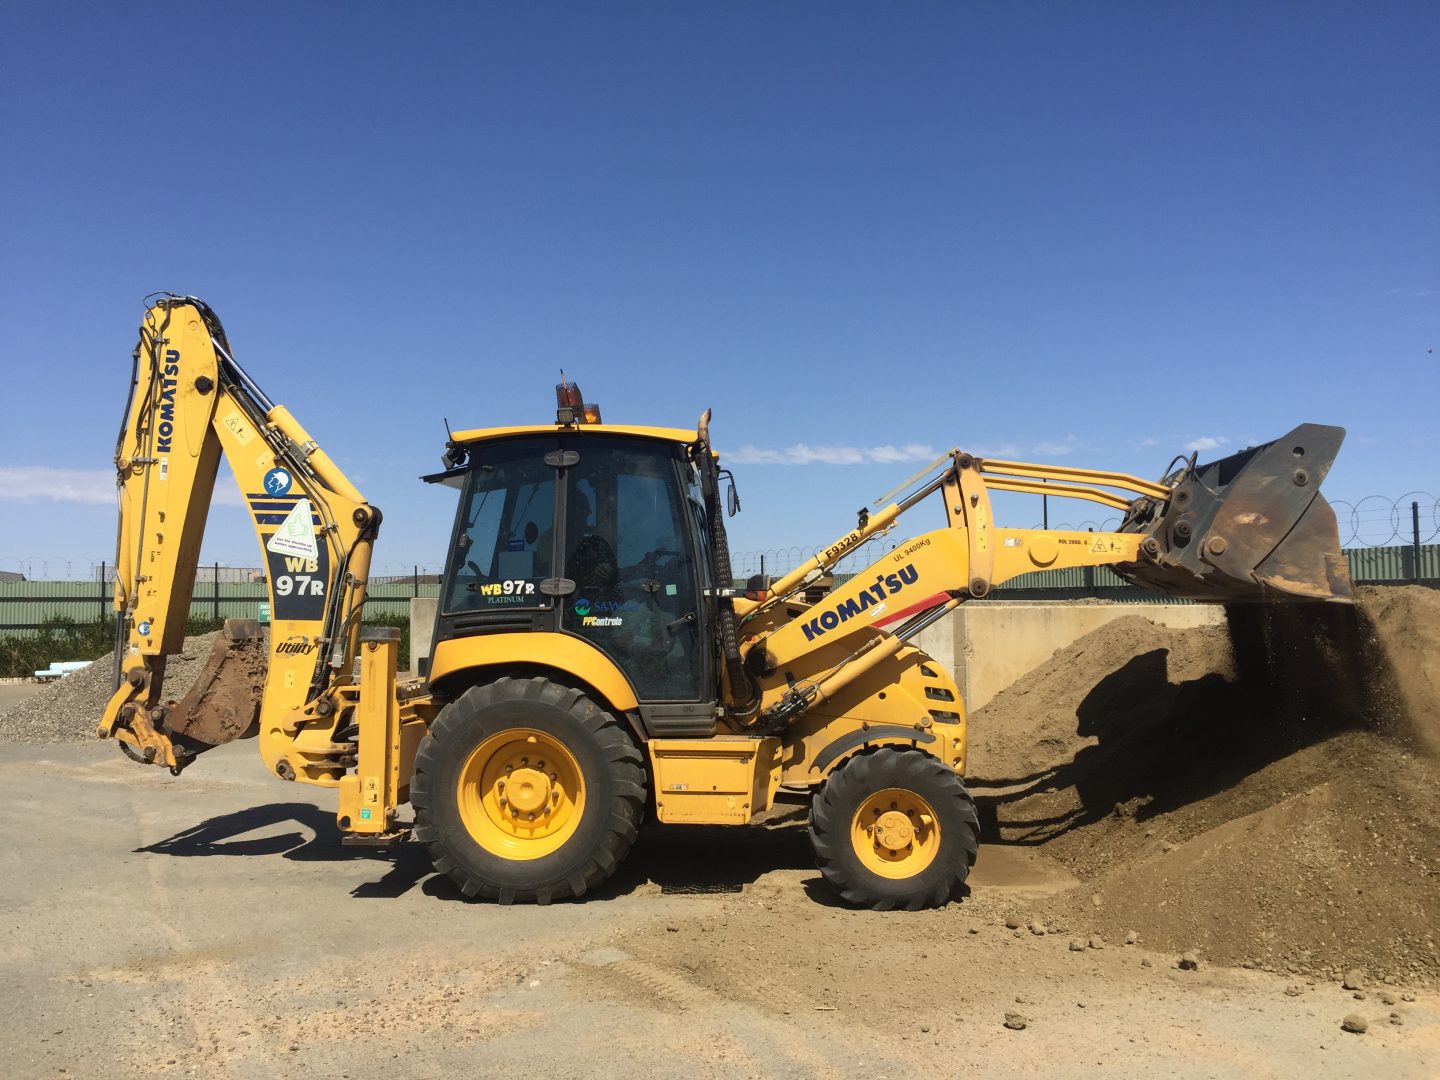 Unloading a backhoe using a cl5000 system